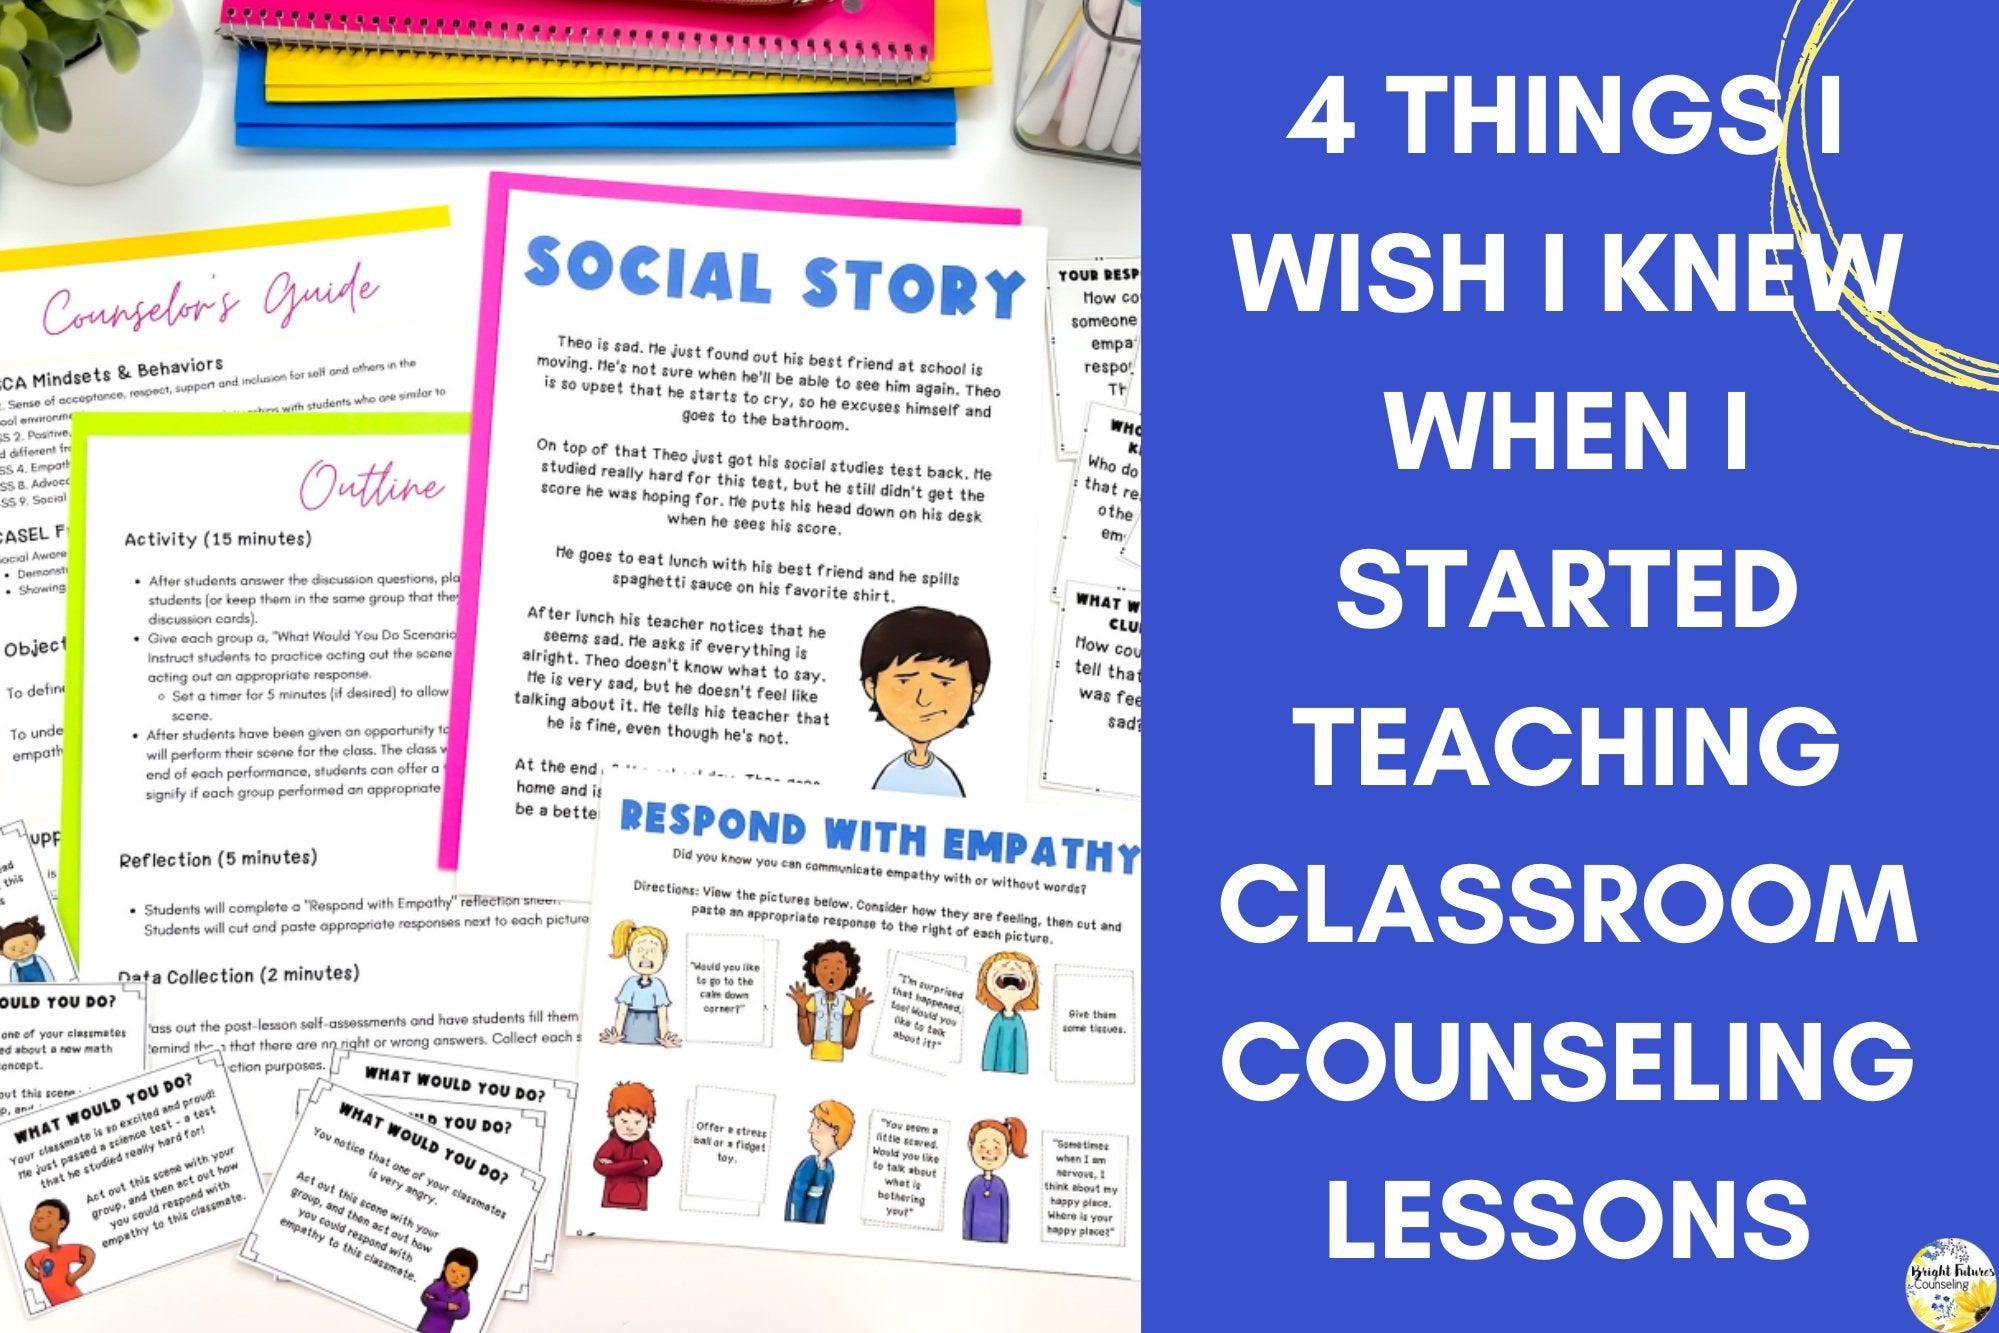 4 Things I Wish I Knew When I Started Teaching Classroom Counseling Lessons